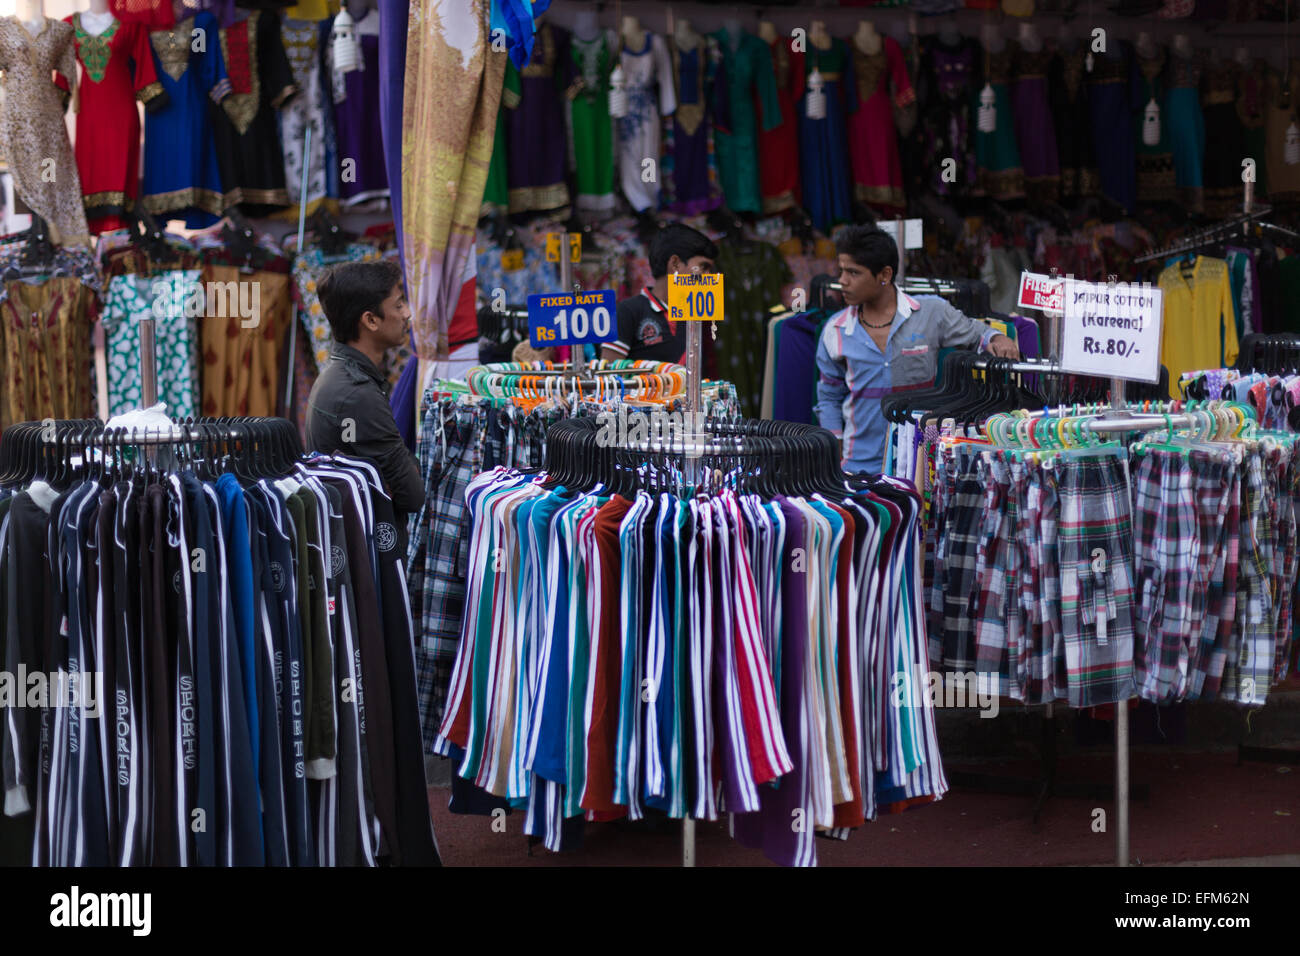 Readymade garments for sale at Numaish-2015 Stock Photo - Alamy